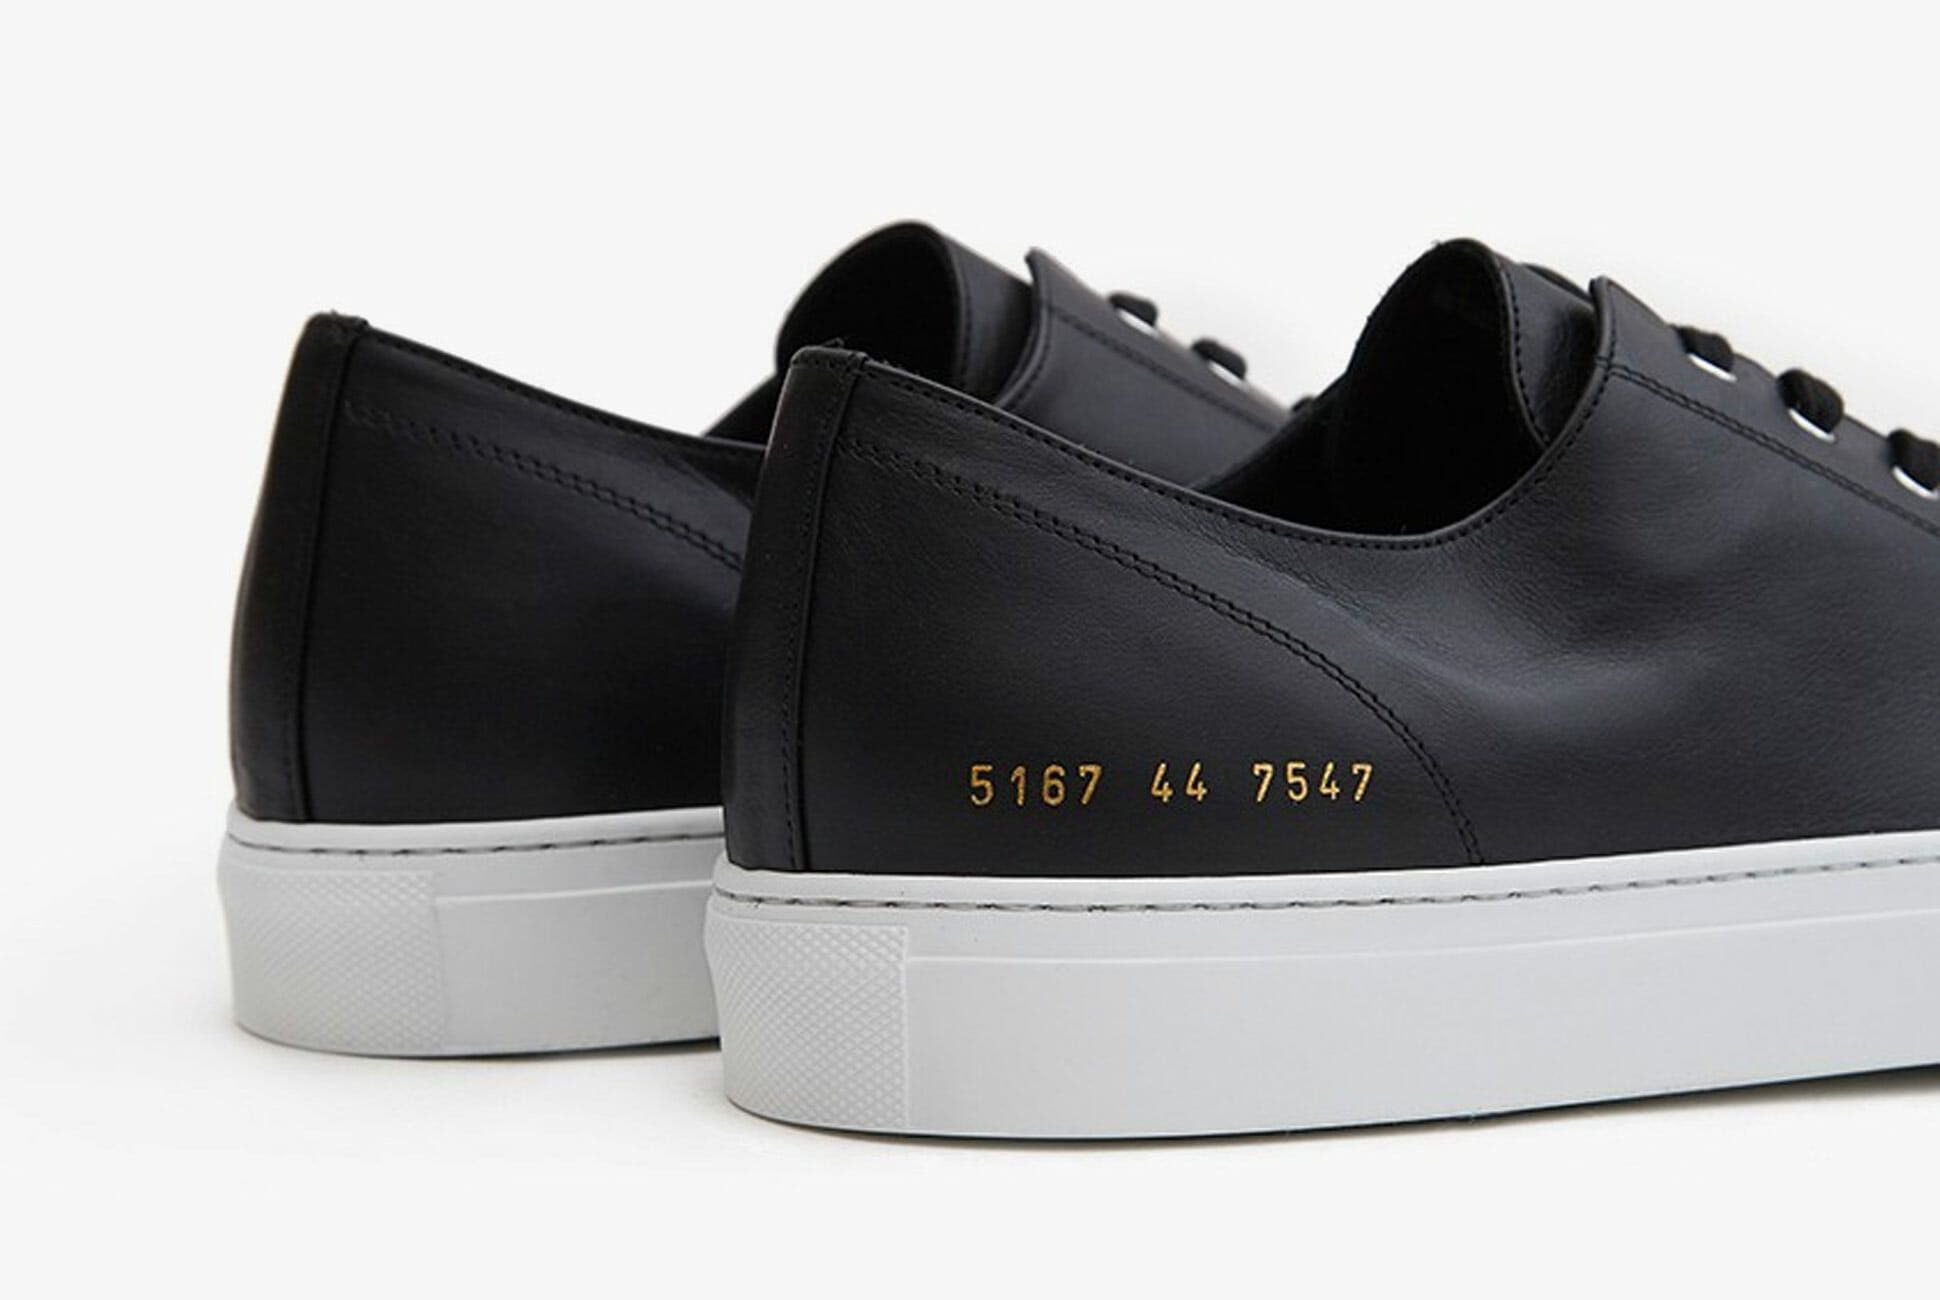 These Minimalist Leather Sneakers